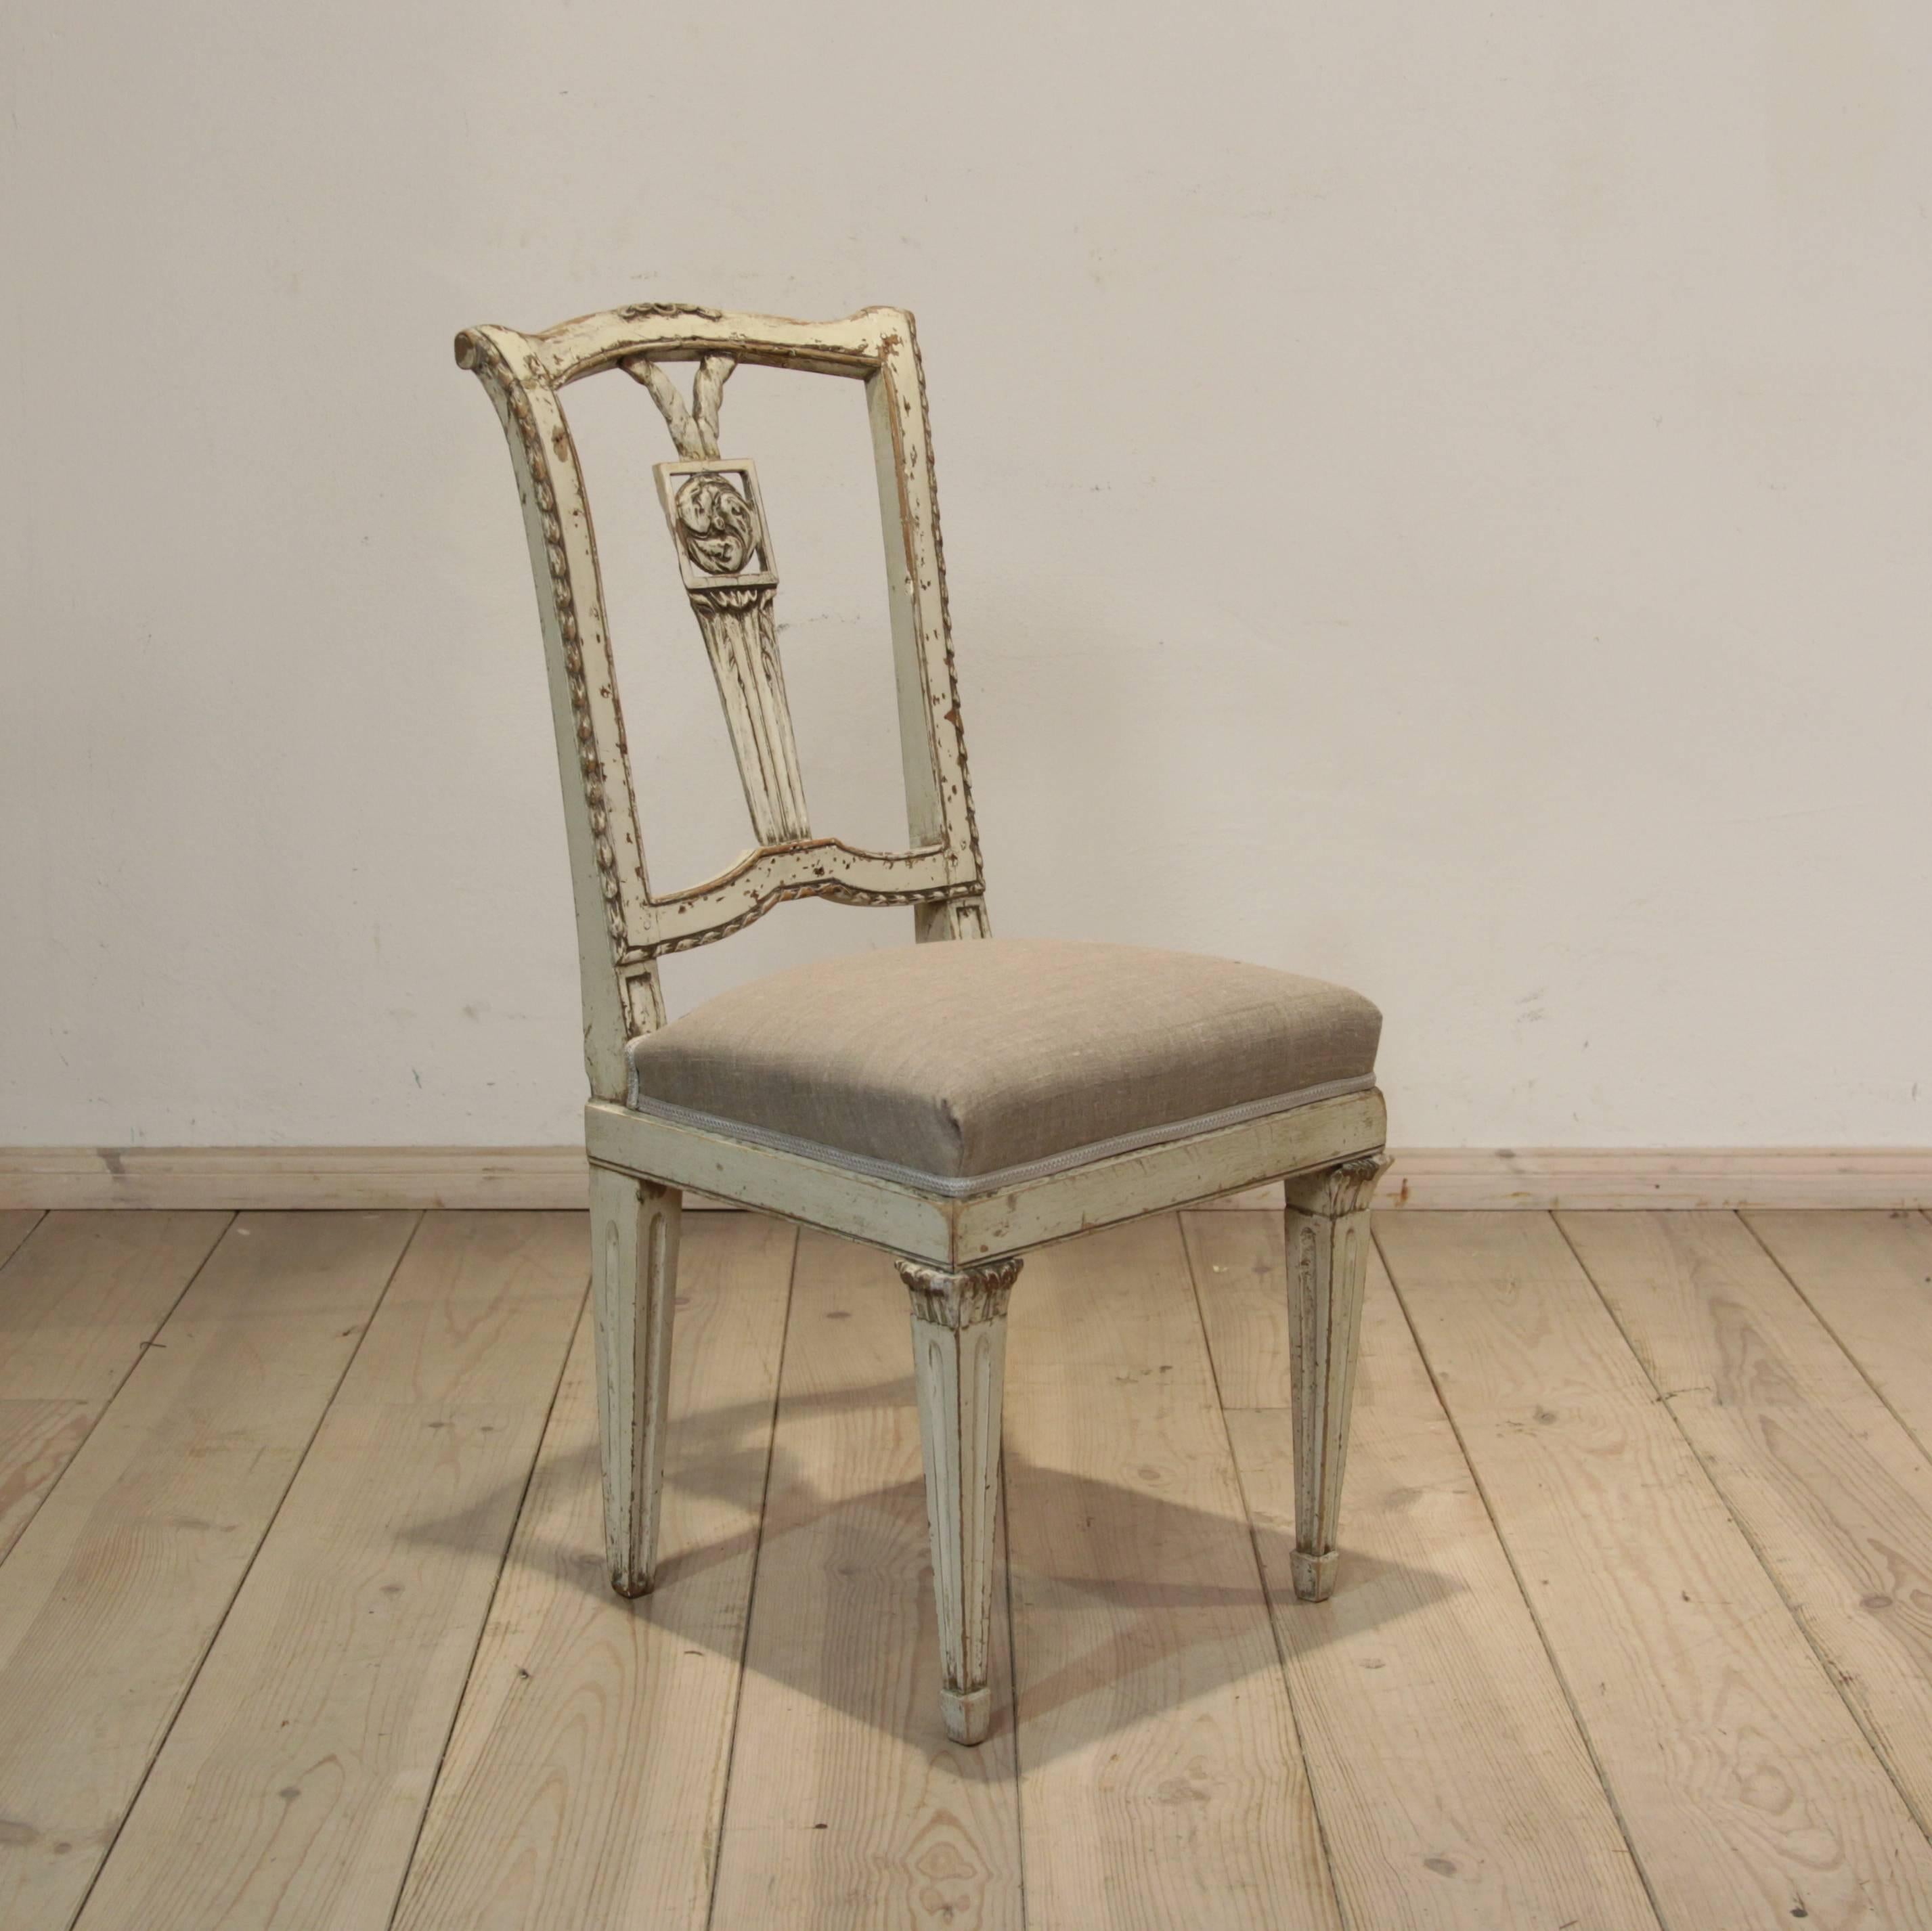 This Italian Louis XVI chair from, circa 1780 is made of beech and has its original paint. The linen cover is new.